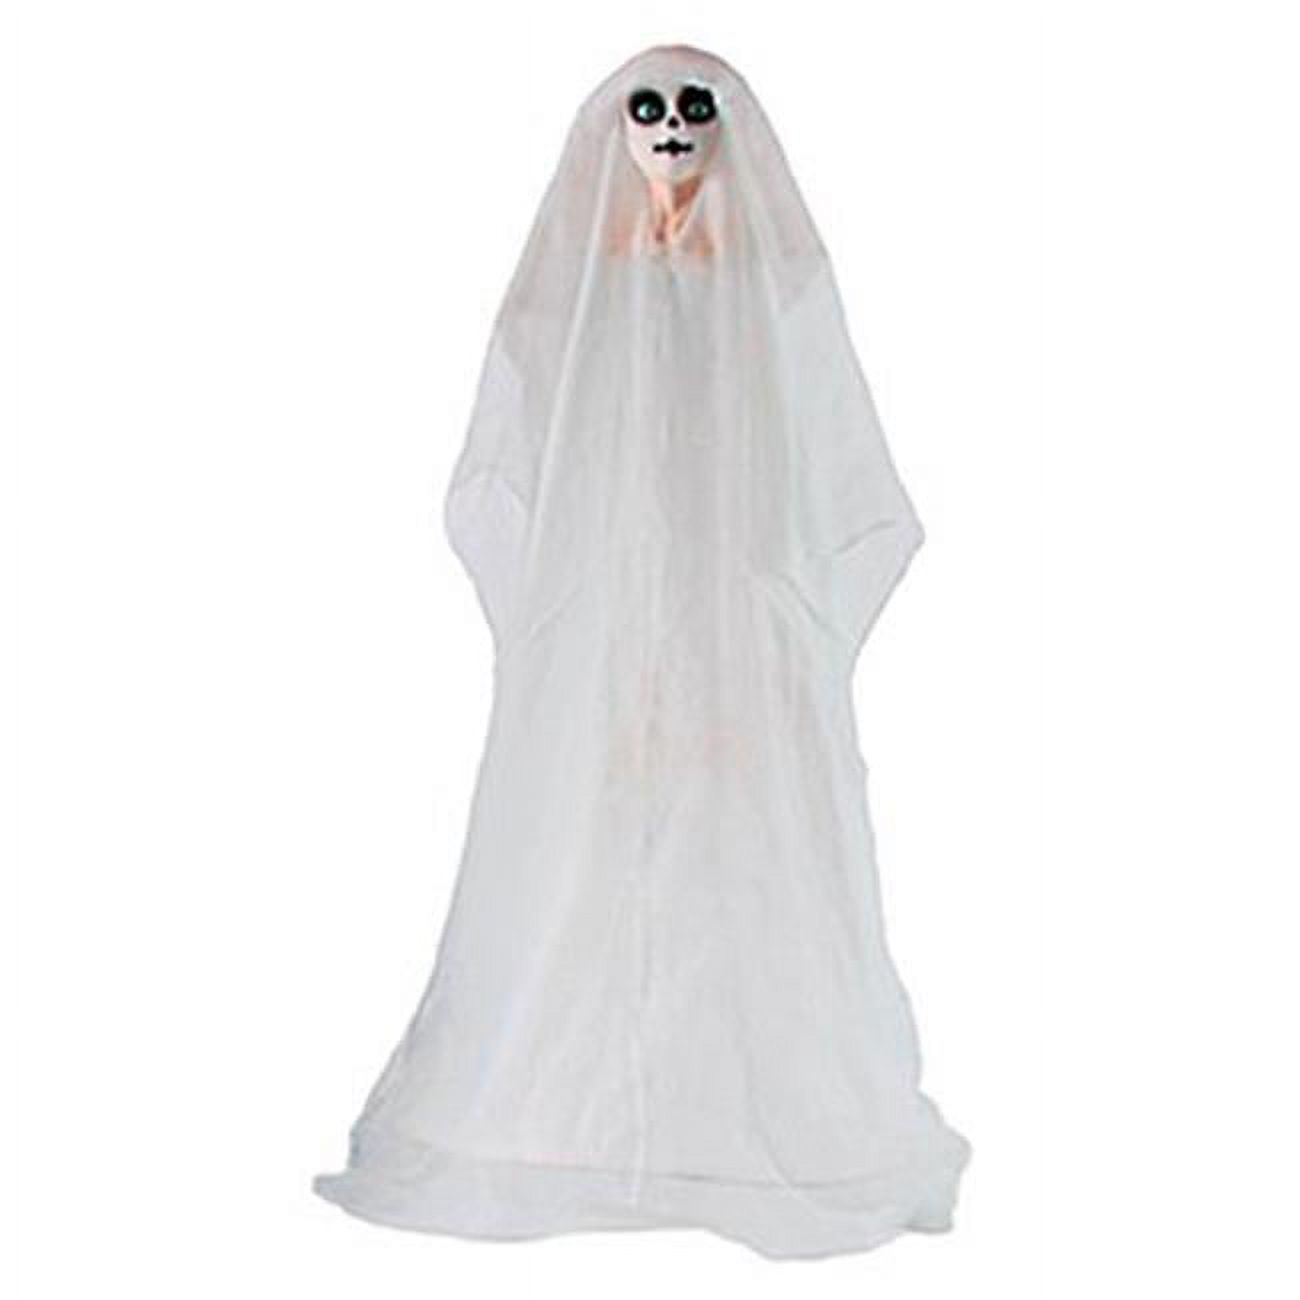 Fun World Creepy Ghostly Girl Lawn Walker 3 ft. Outdoor Decor, White - image 1 of 2